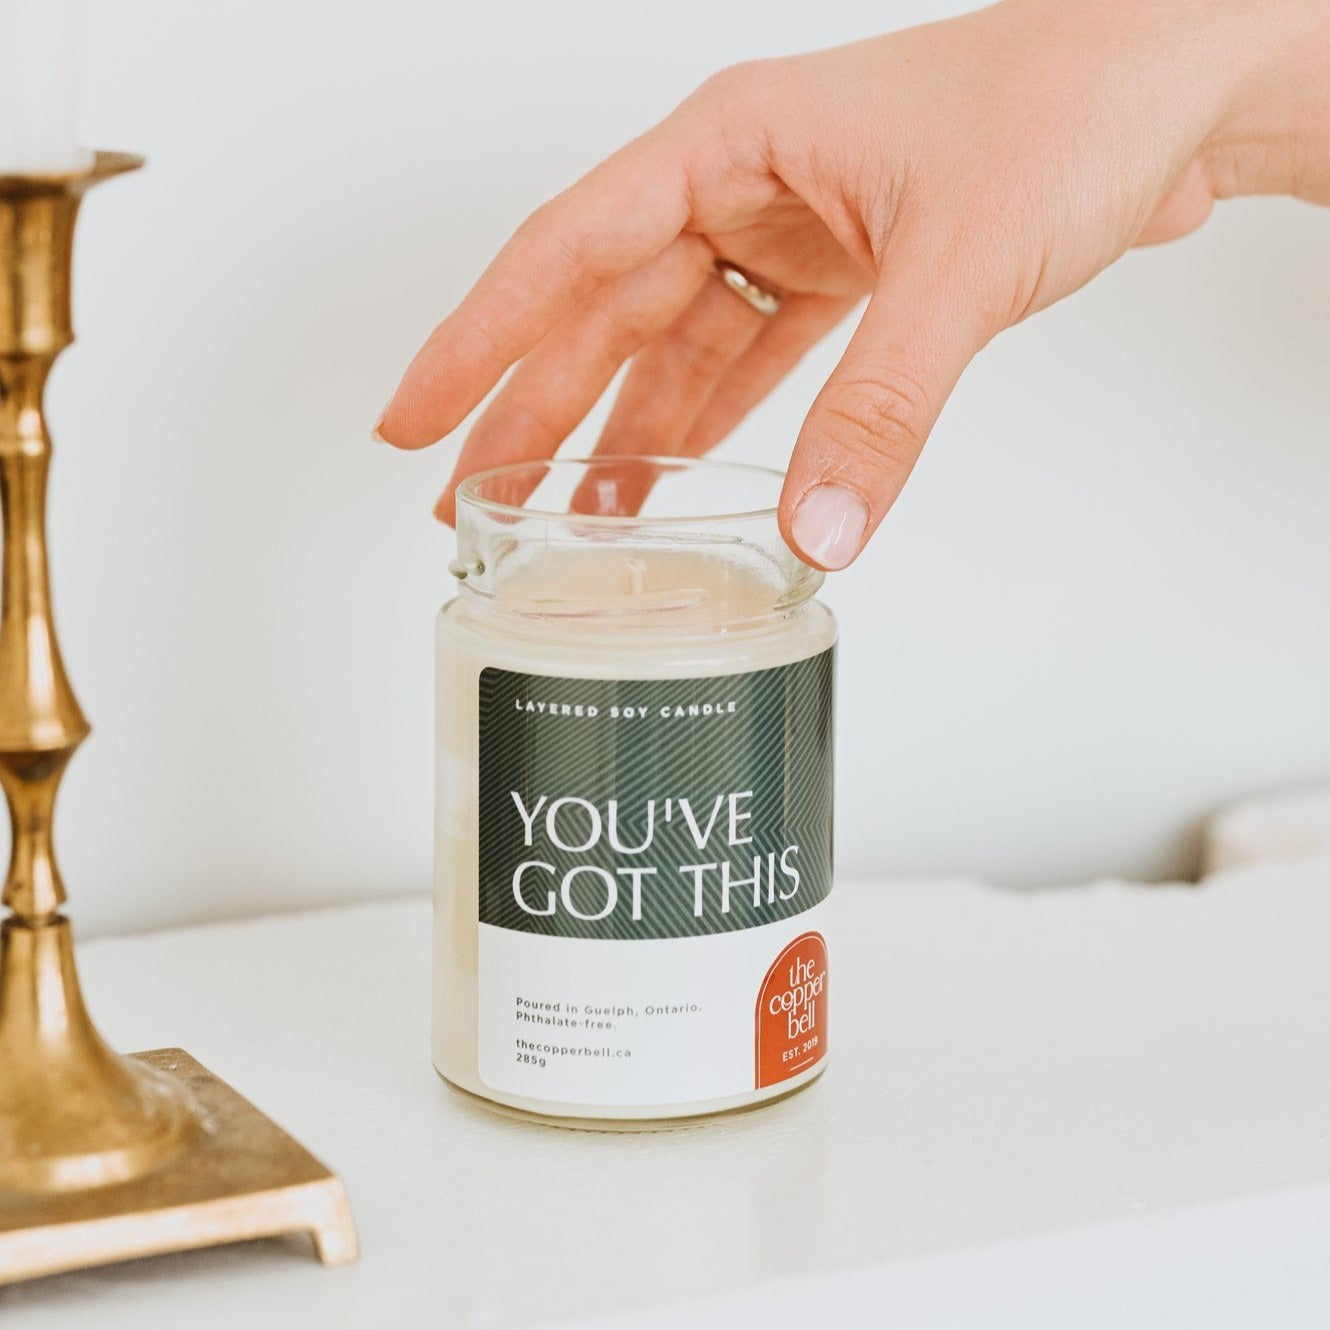 you've got this. encouraging candle for gifting to your friends.